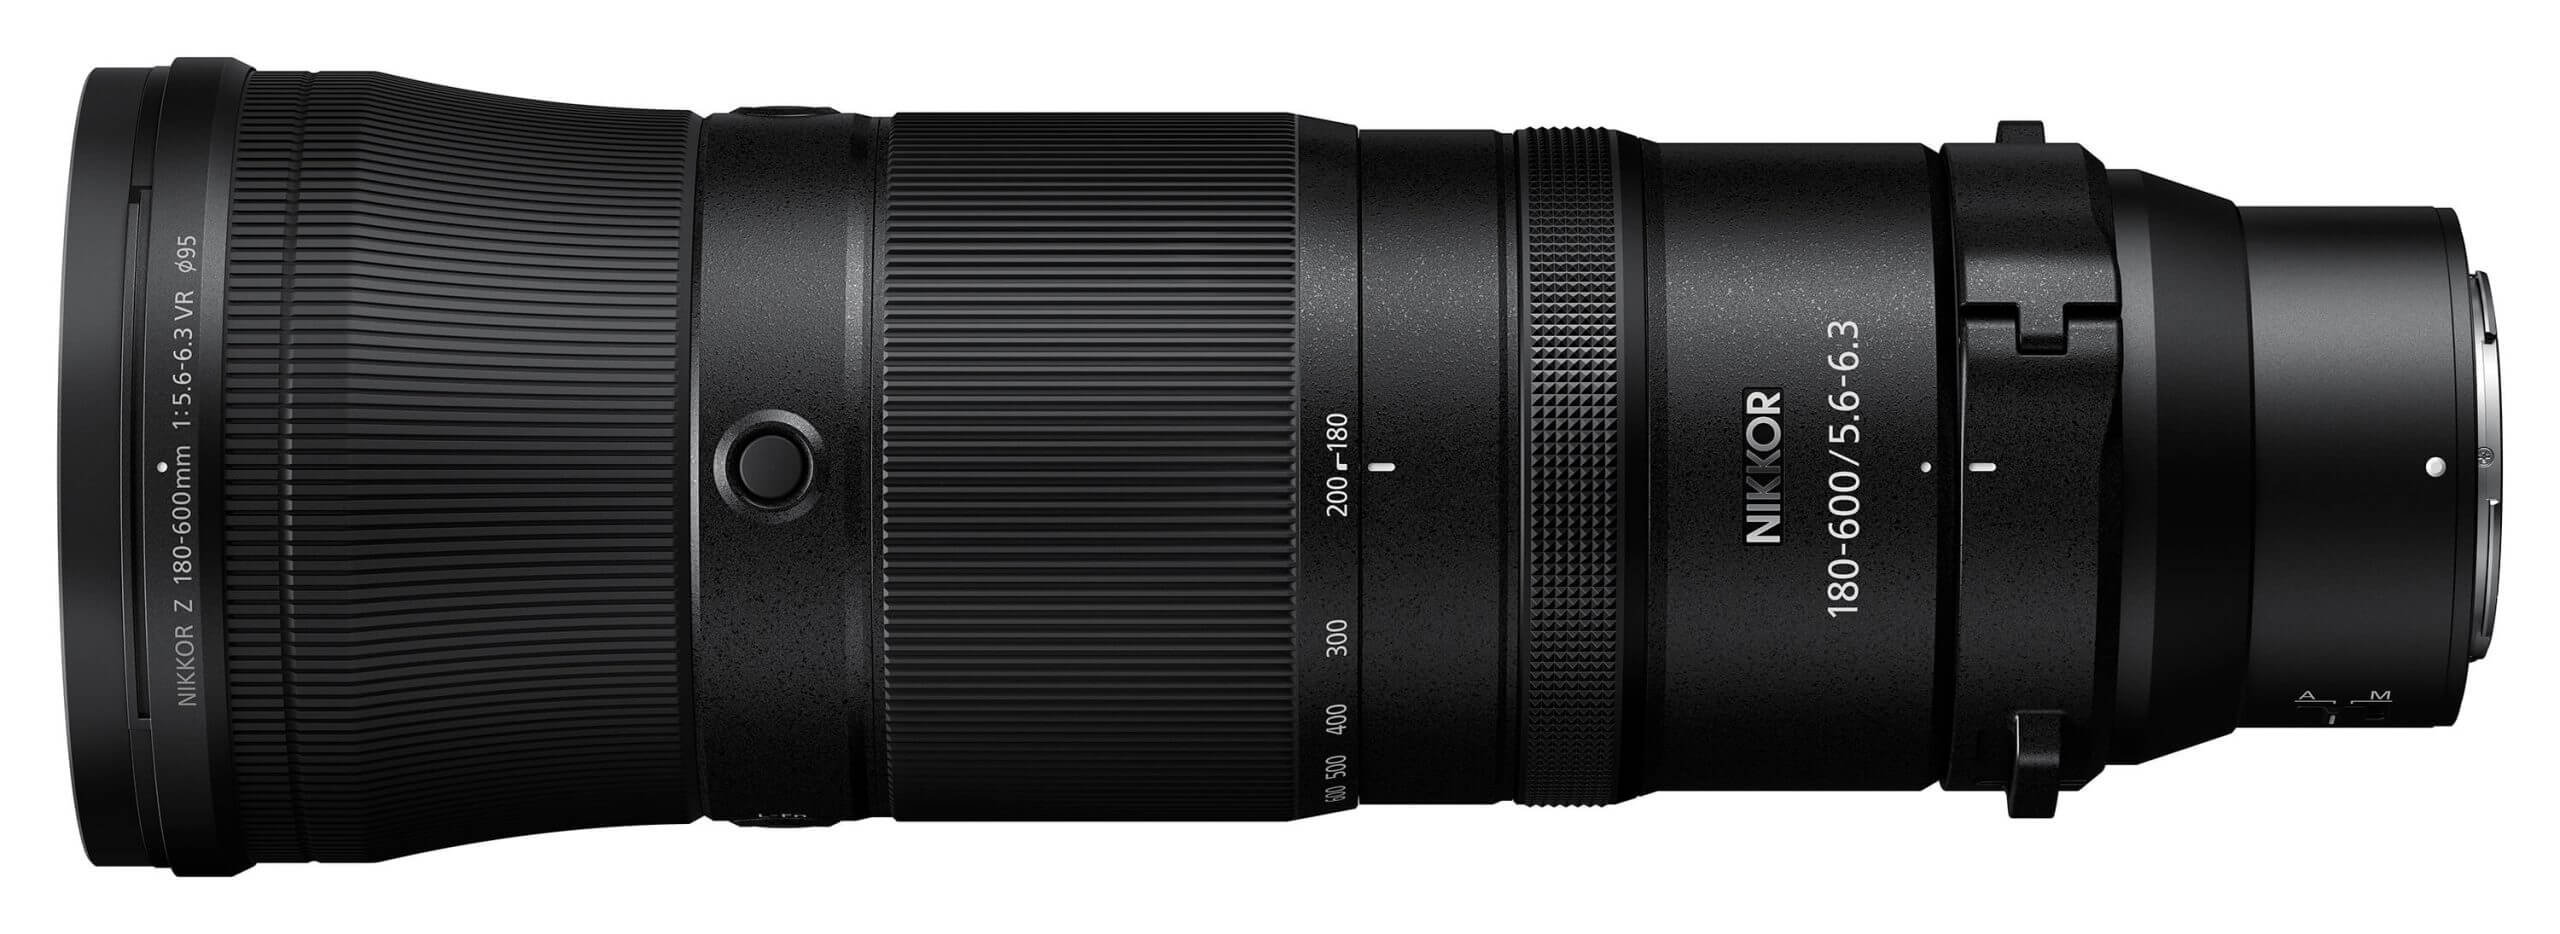 Z180 600 5 6 6 3 angle2.high  scaled - Nikon officially announces the Z 180-600mm F/5.6-6.3 VR and Z 70-180mm f/2.8